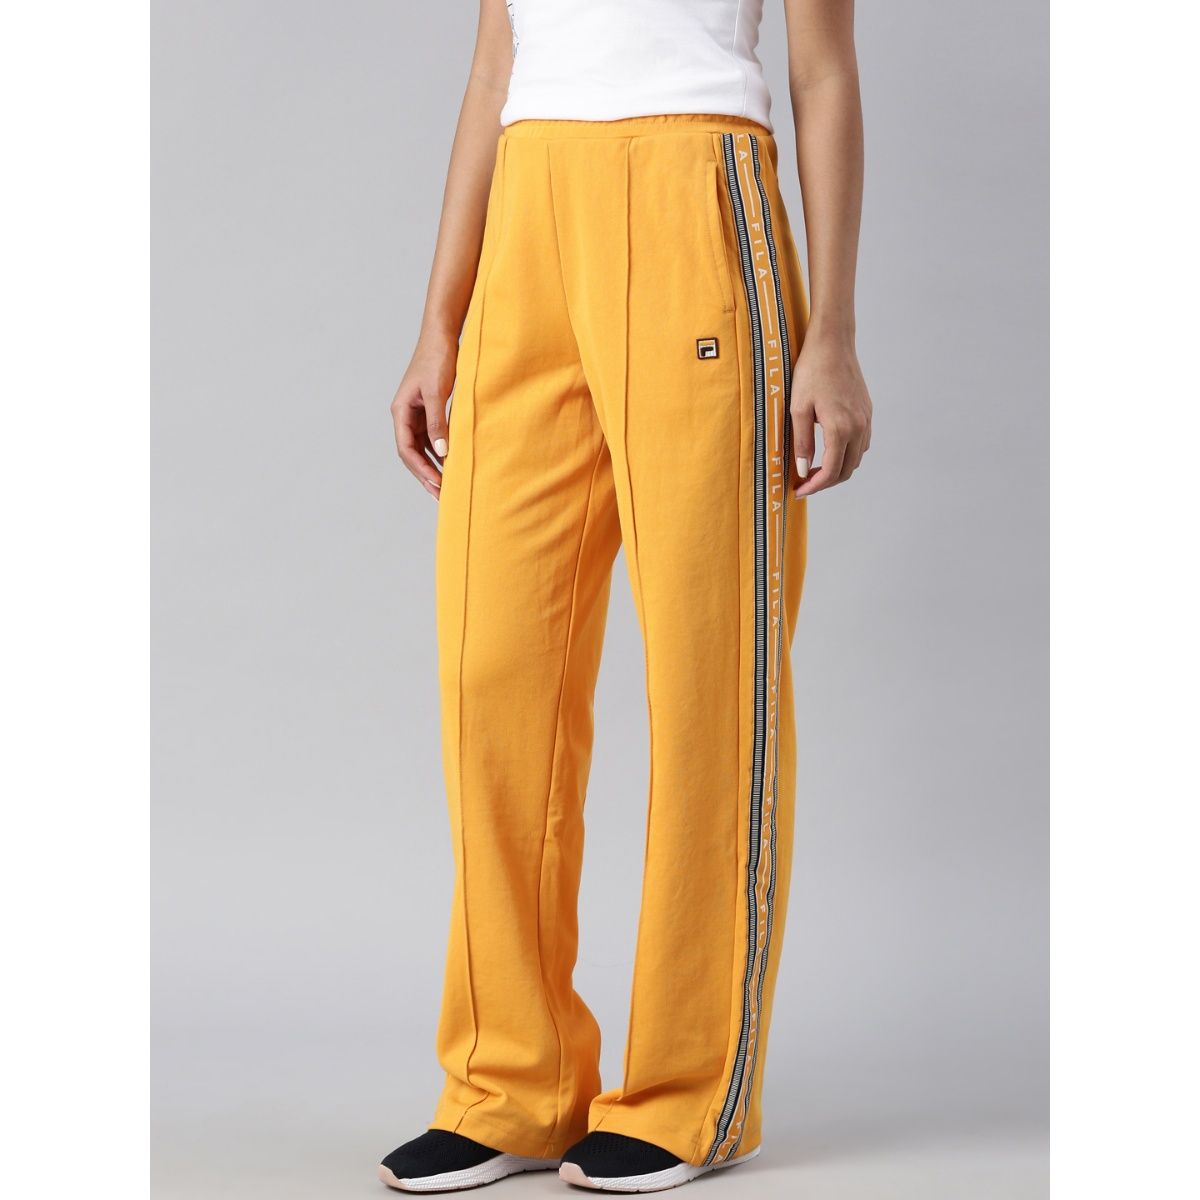 adidas Firebird Track Pant  Urban Outfitters